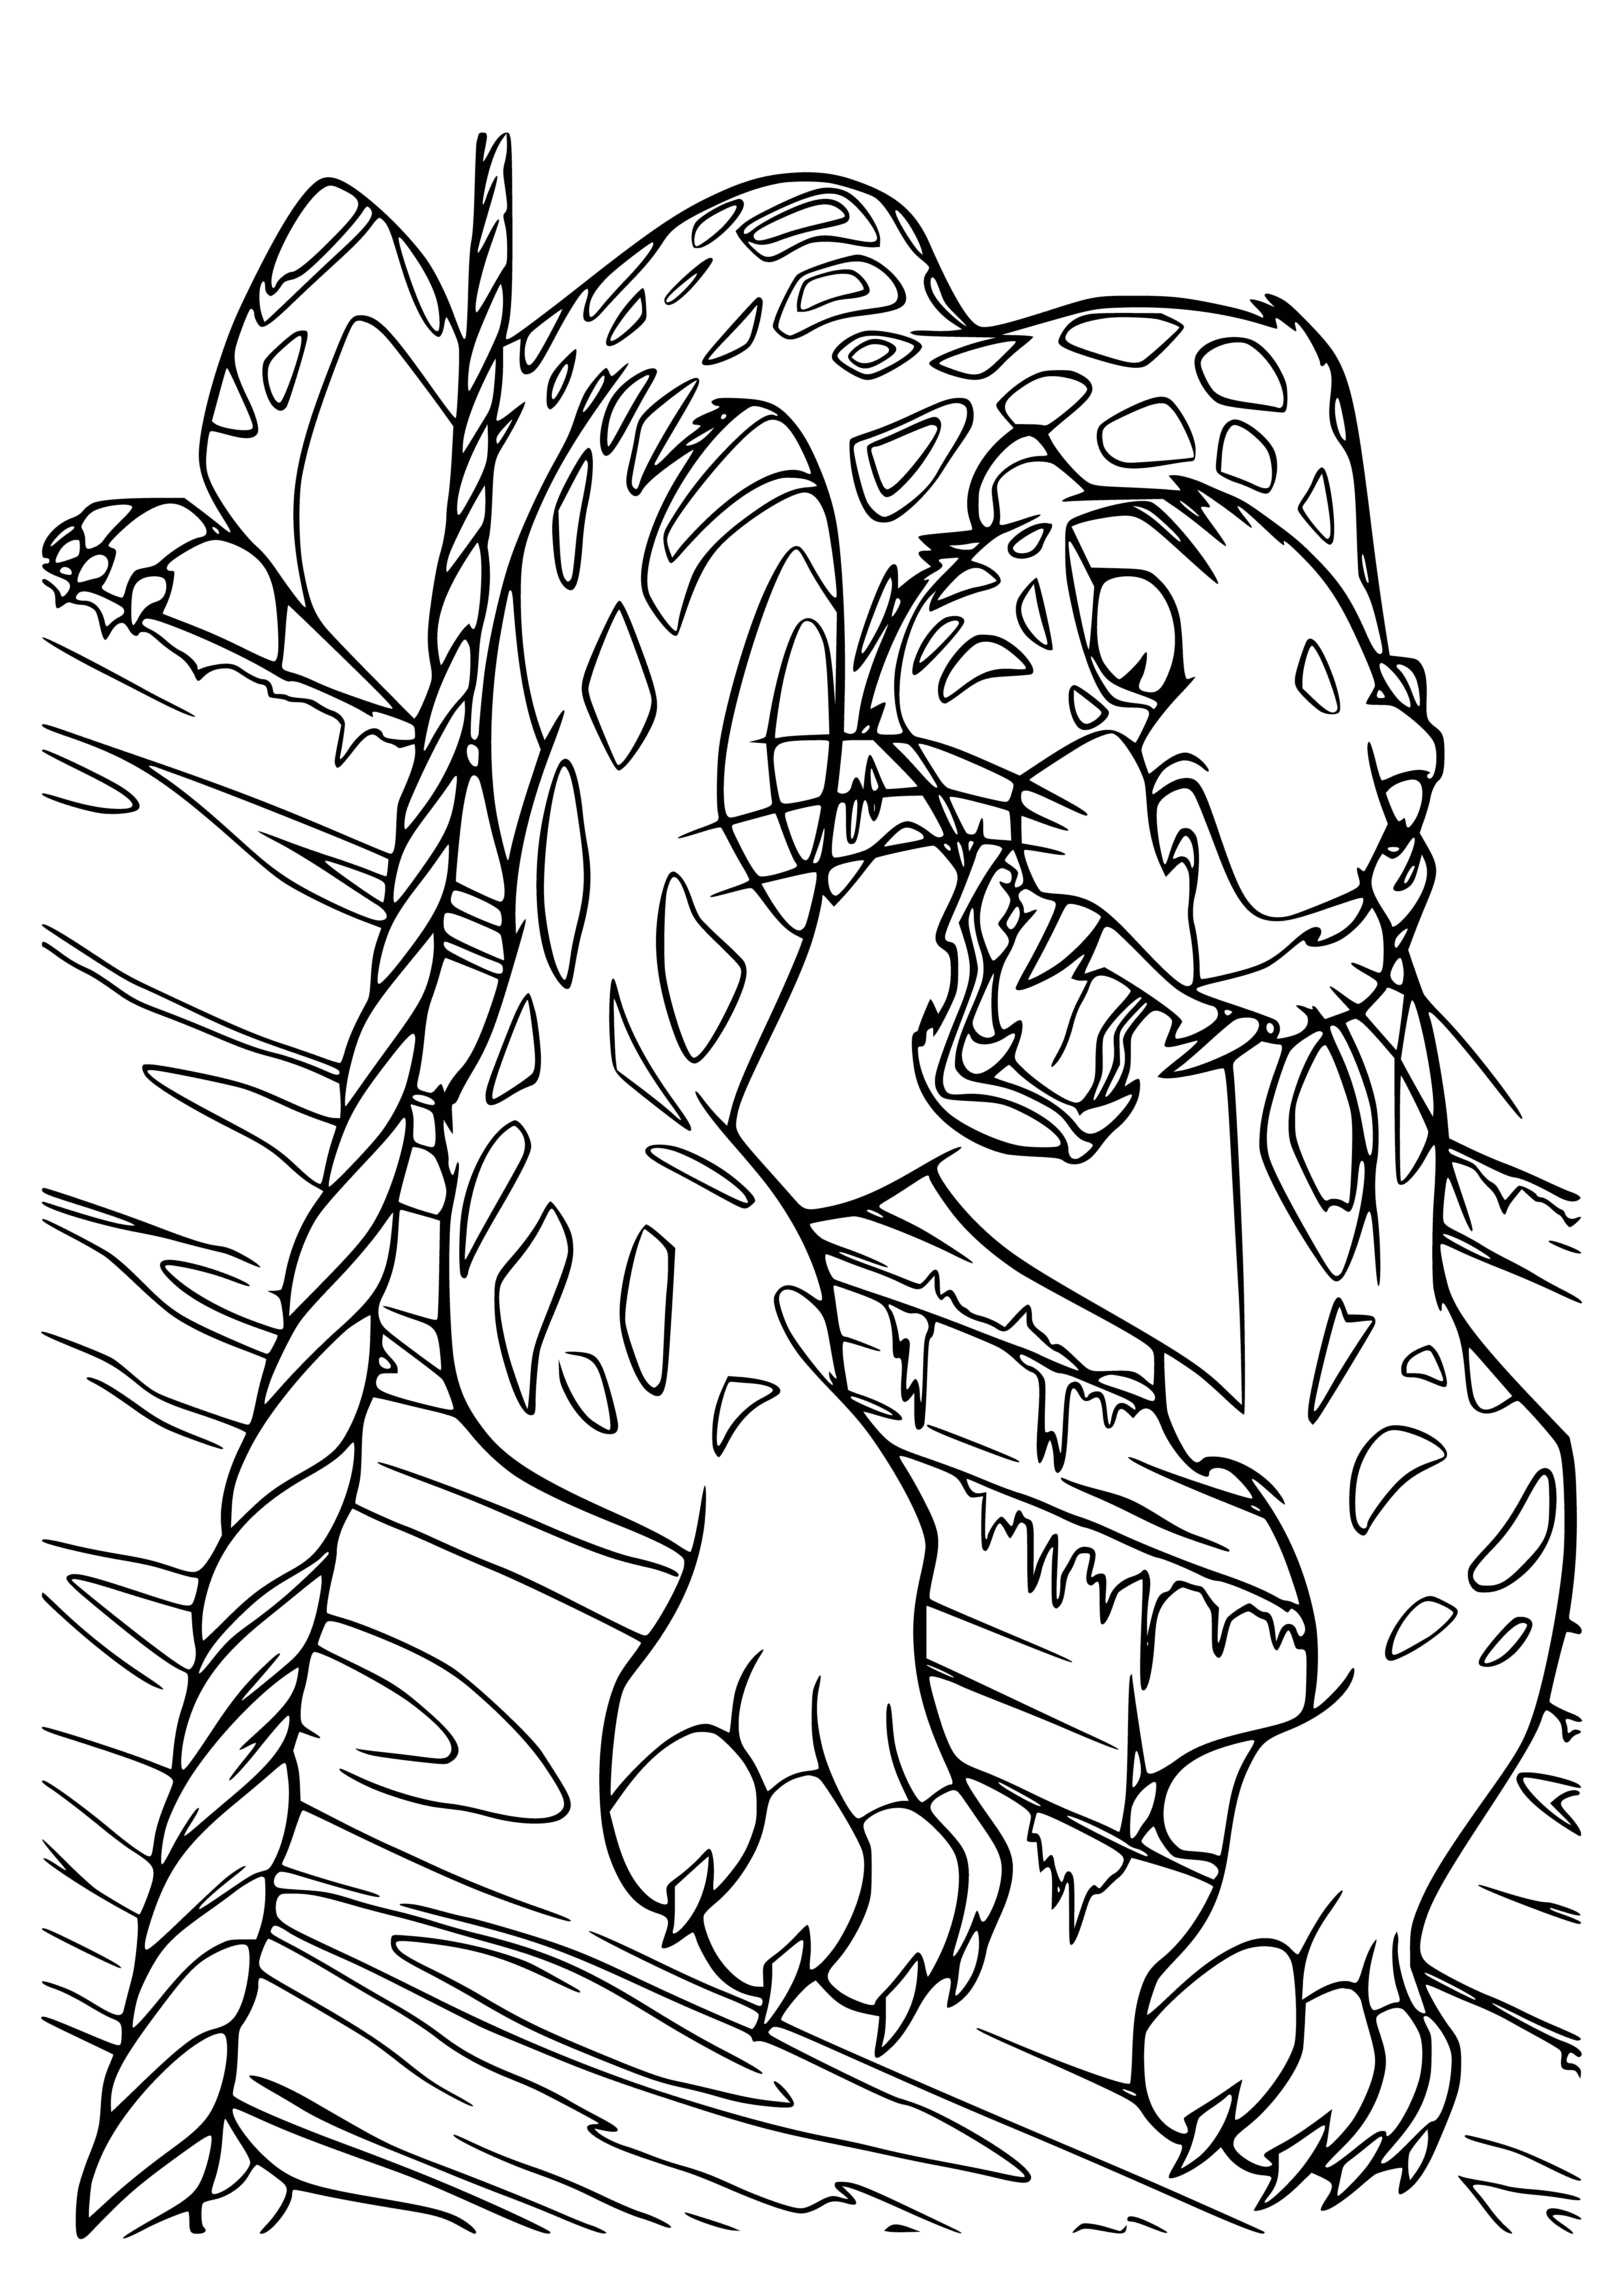 coloring page: A man wielding a spear towers above a snarling leopard with extended claws.